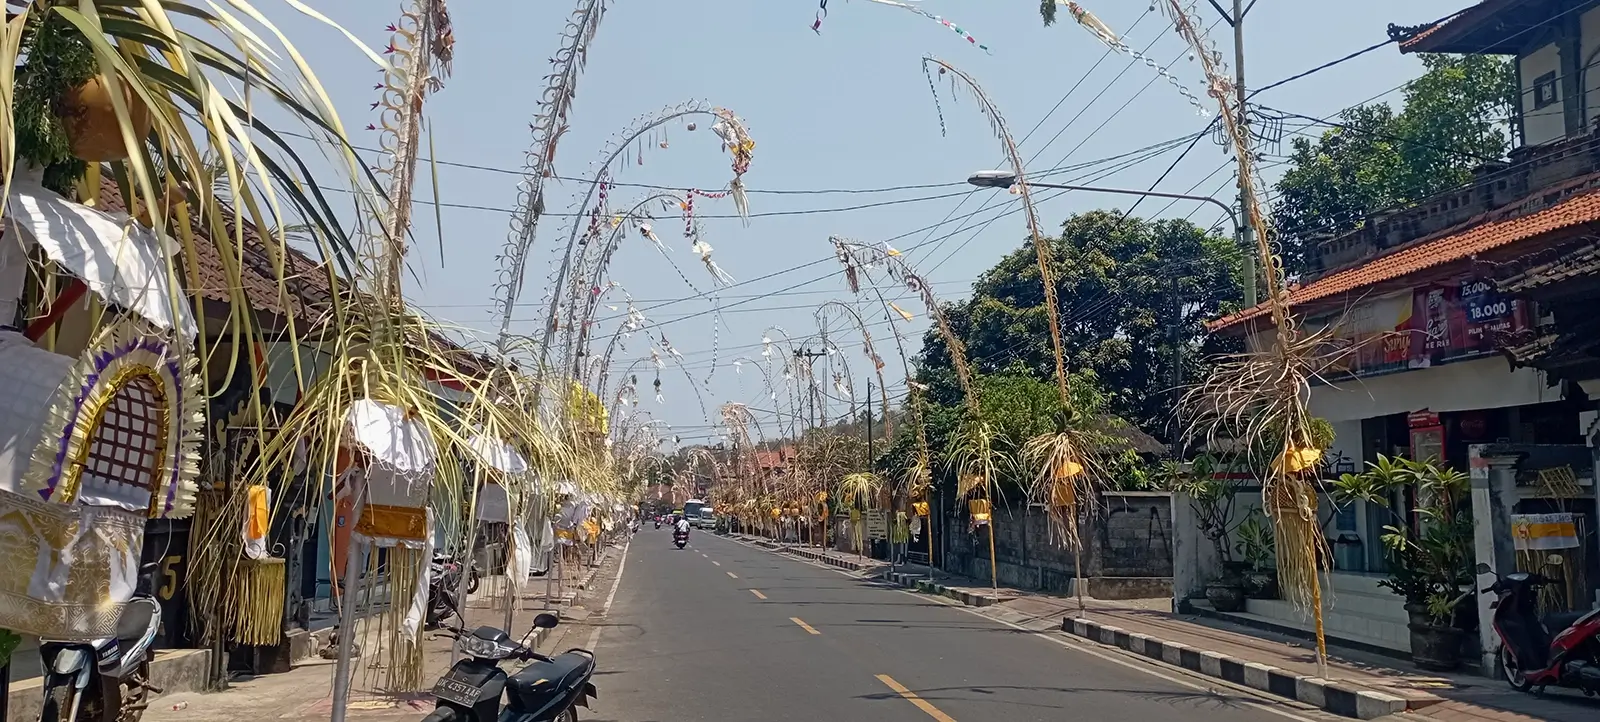 Balinese street after a ceremony